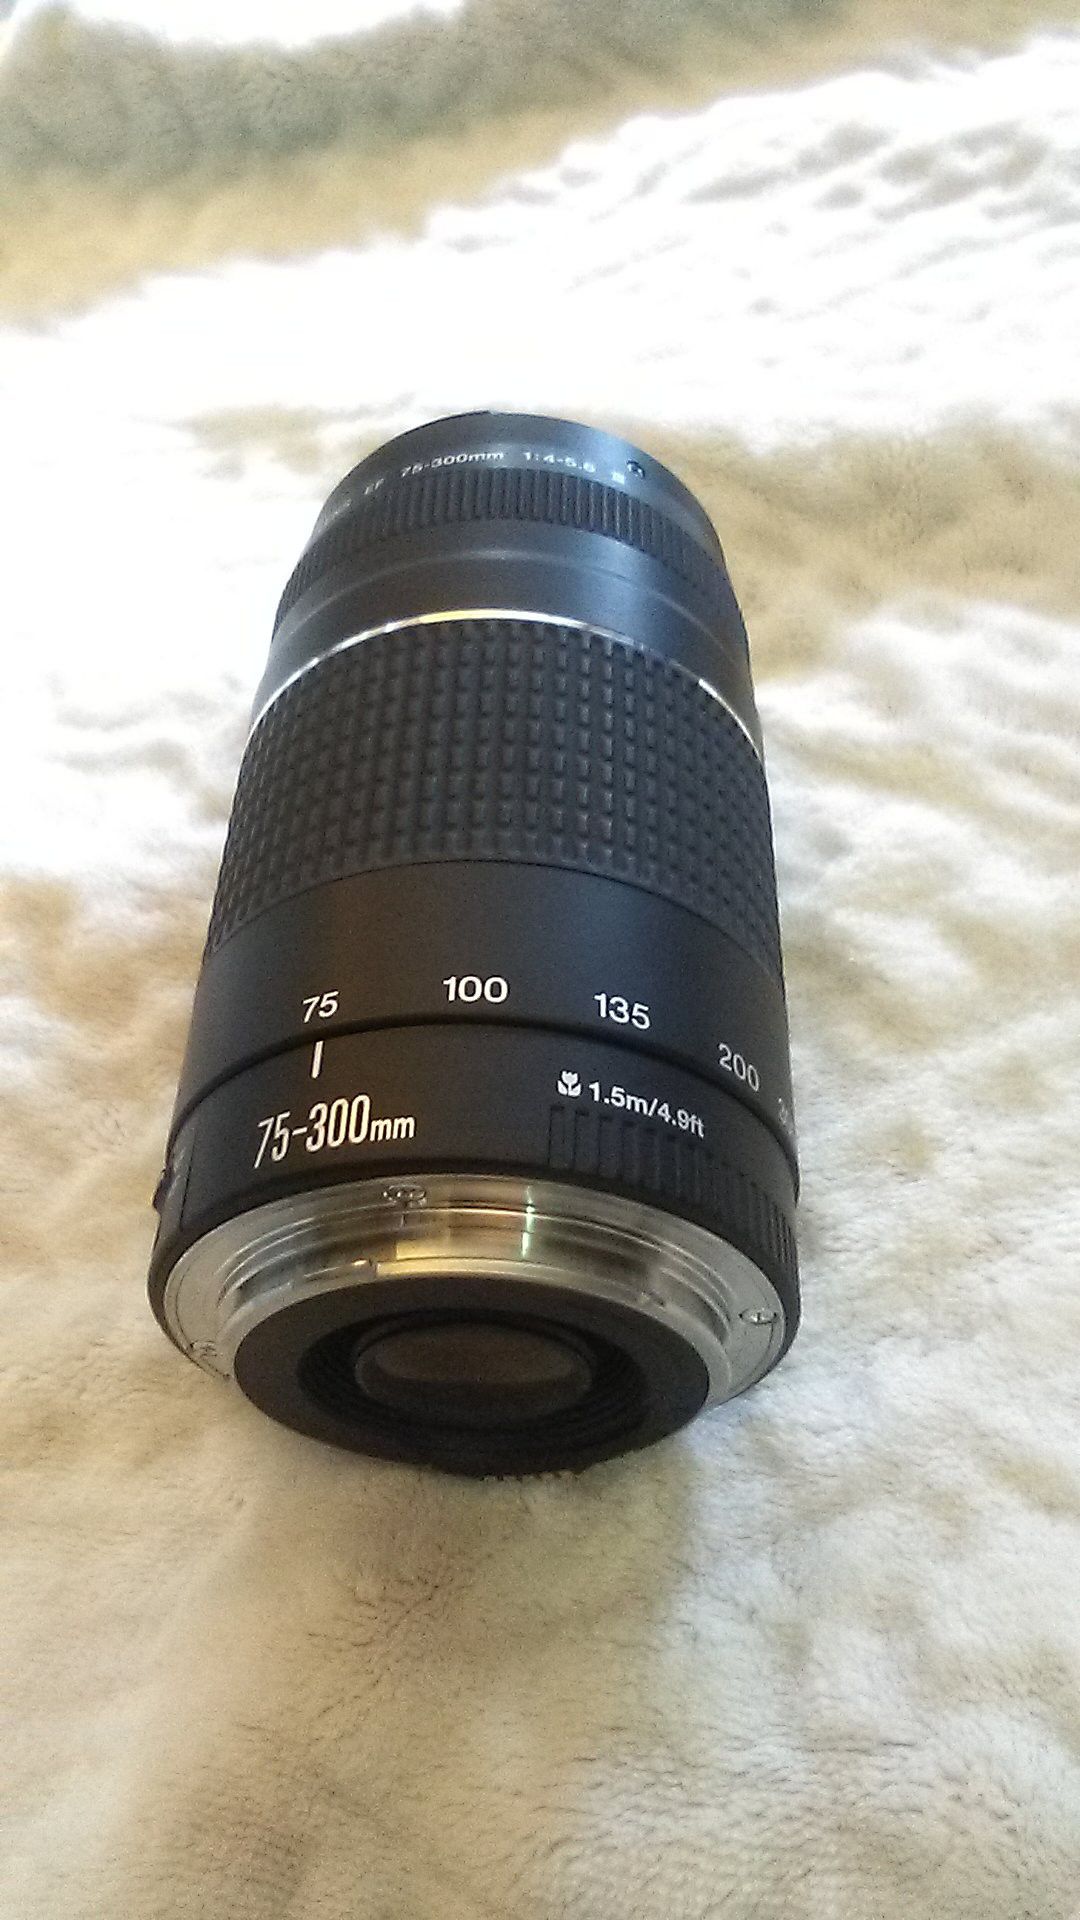 Canon lens zooms